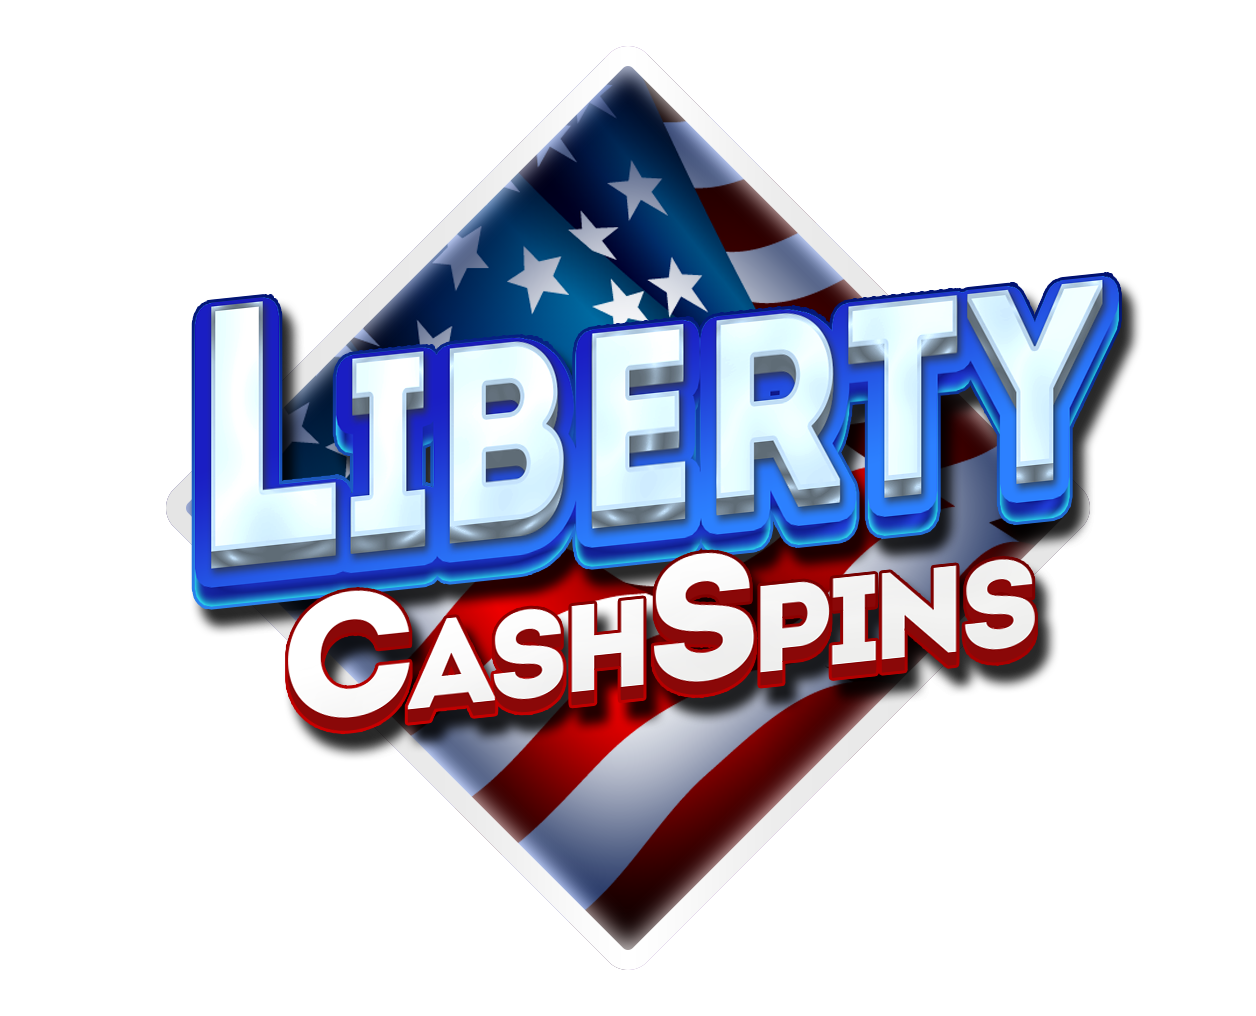 Liberty Cash Spins Inspired Entertainment